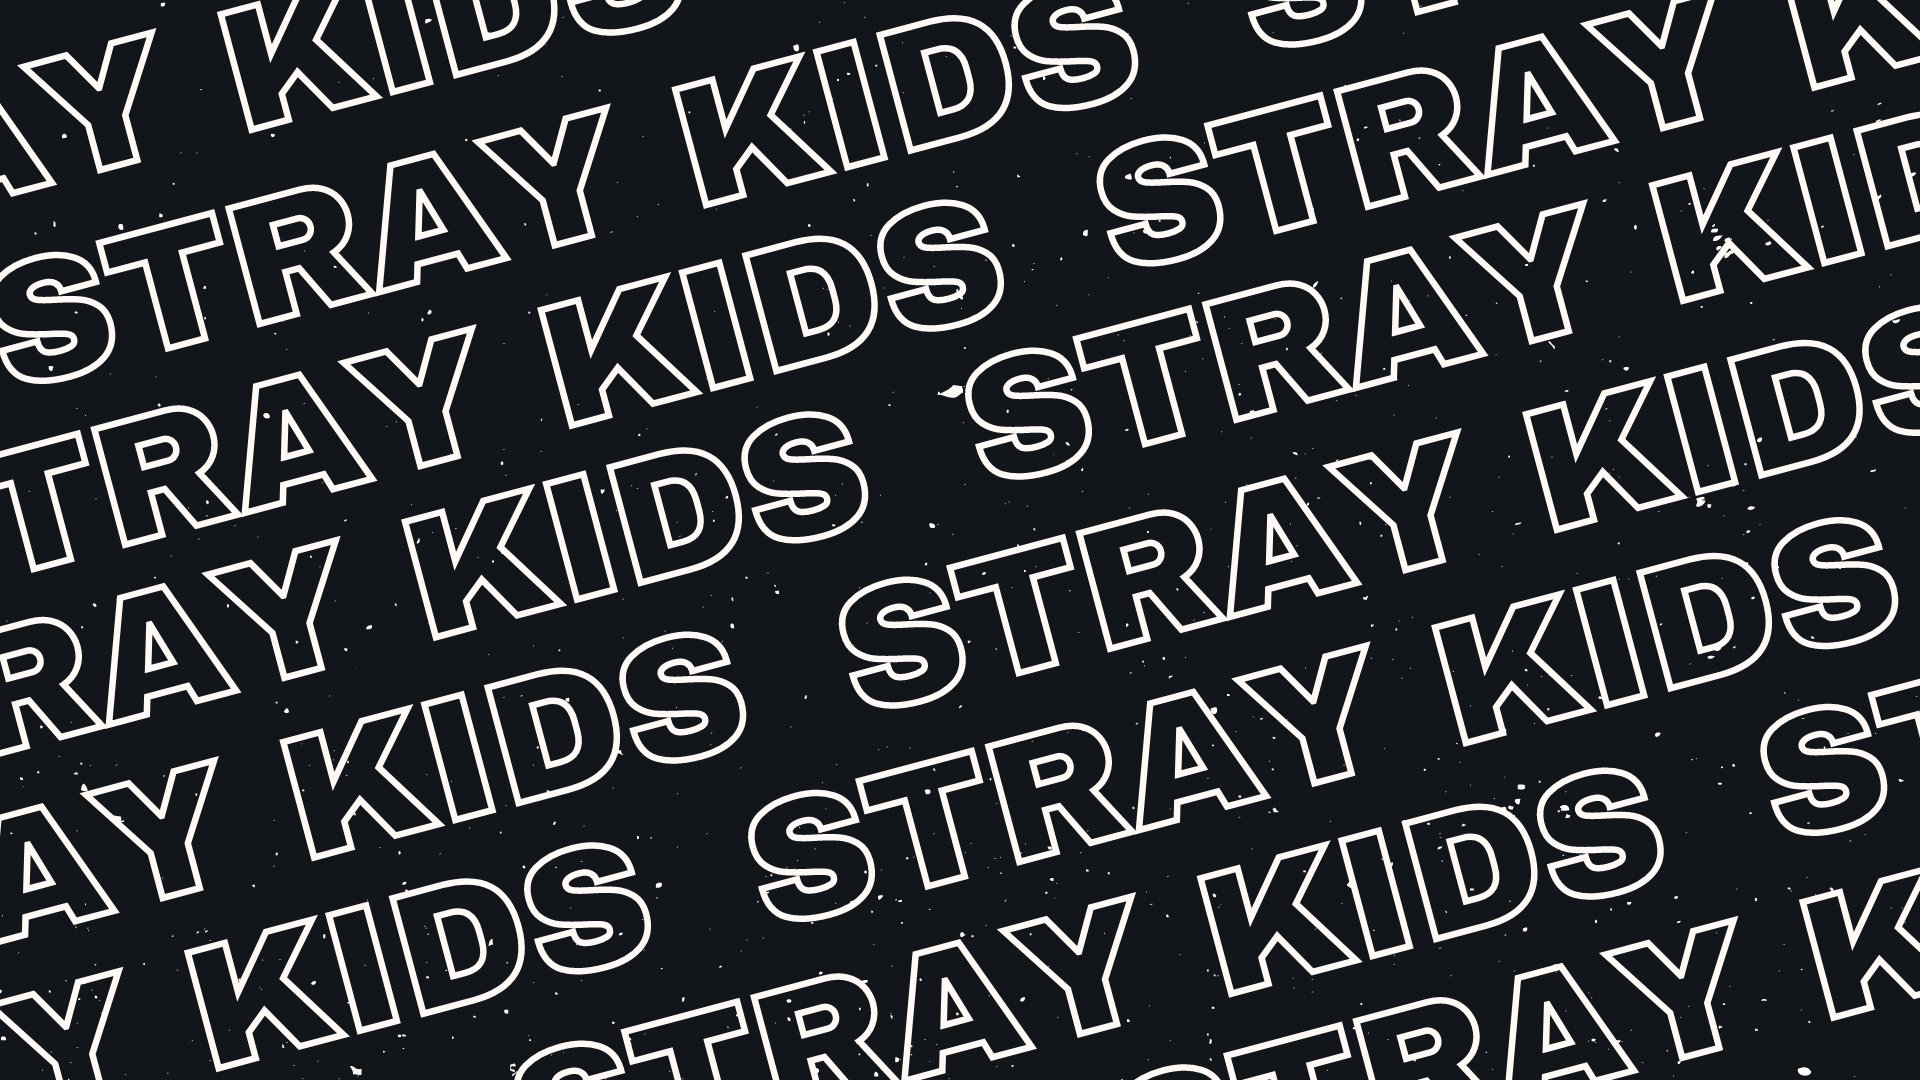 ☻ No Twitter: I Have No Idea Why I Did Some Wallpaper This Morning. This Are Random. Anywaaaay Free Stray Kids Desktop Wallpaper Again!!! <33333333 This Is A Thread 1 3 #StrayKidsWallpaper #StrayKids_Beyond_LIVE #